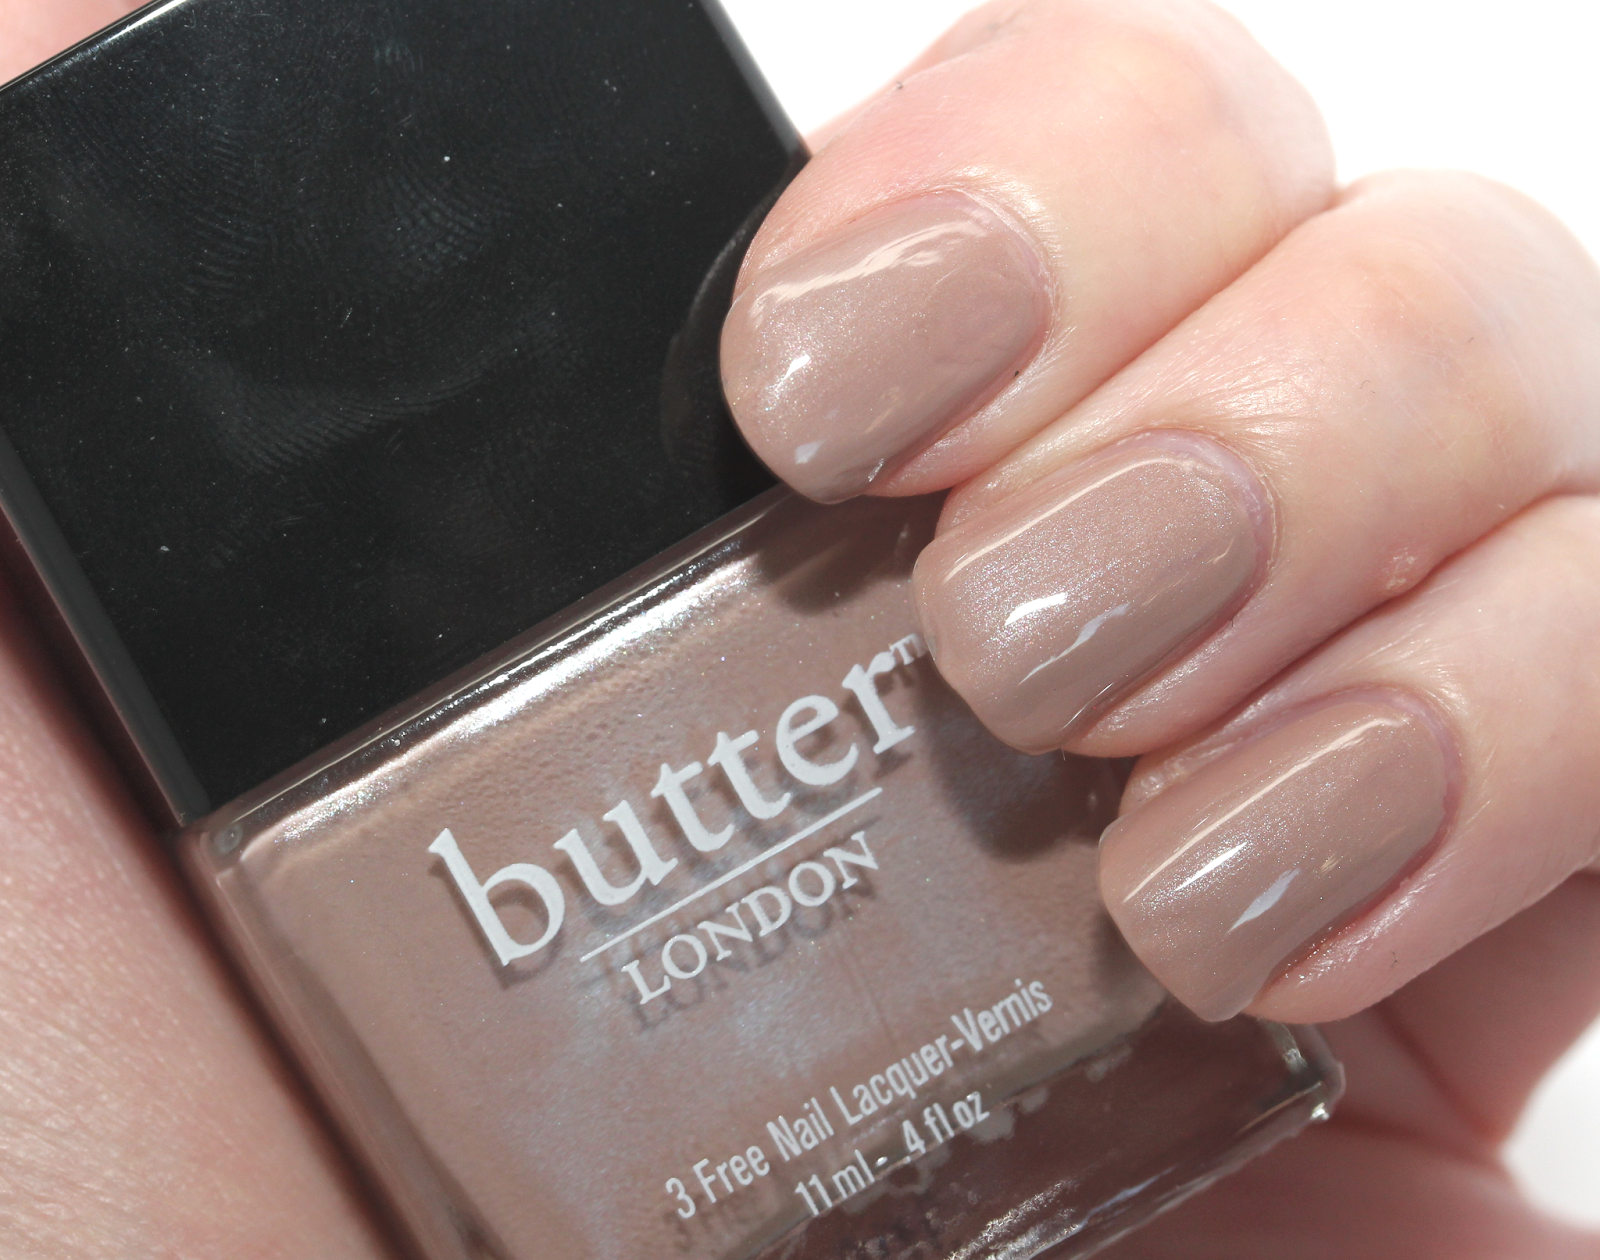 Butter London Nail Lacquer in "Rustic Mauve" - wide 2